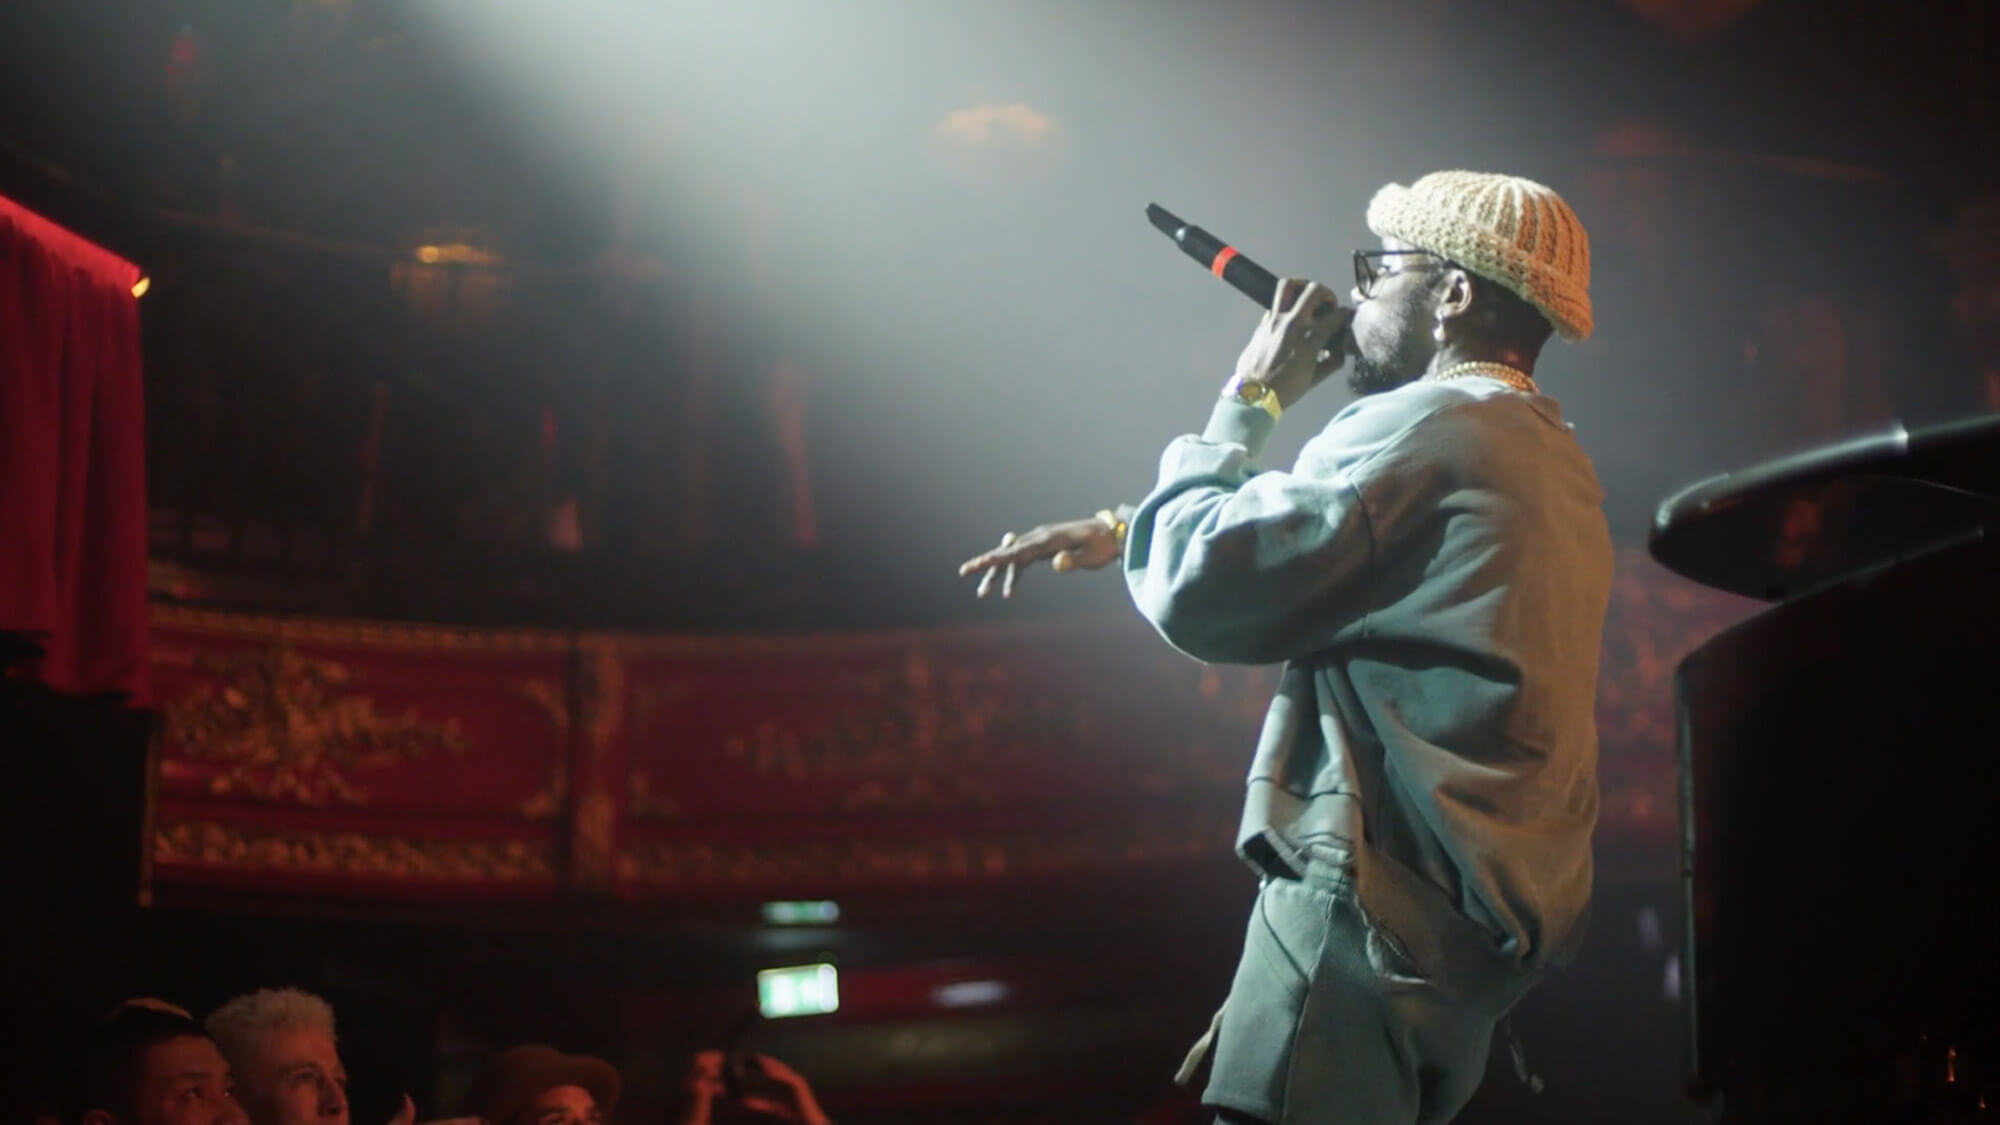 Still image of a singer on stage at an Audemars Piguet event, filmed by Rise Media